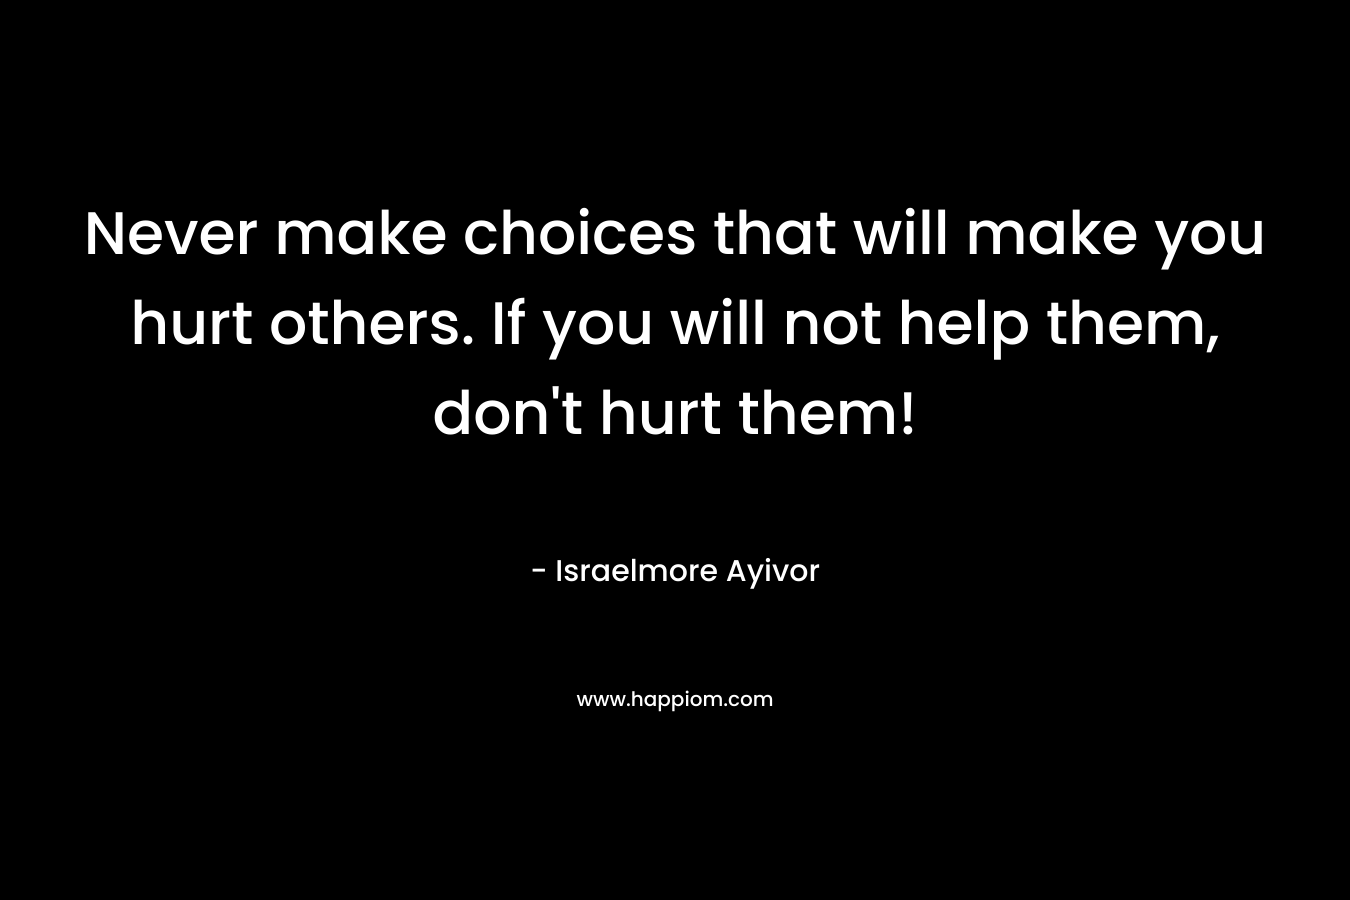 Never make choices that will make you hurt others. If you will not help them, don't hurt them!